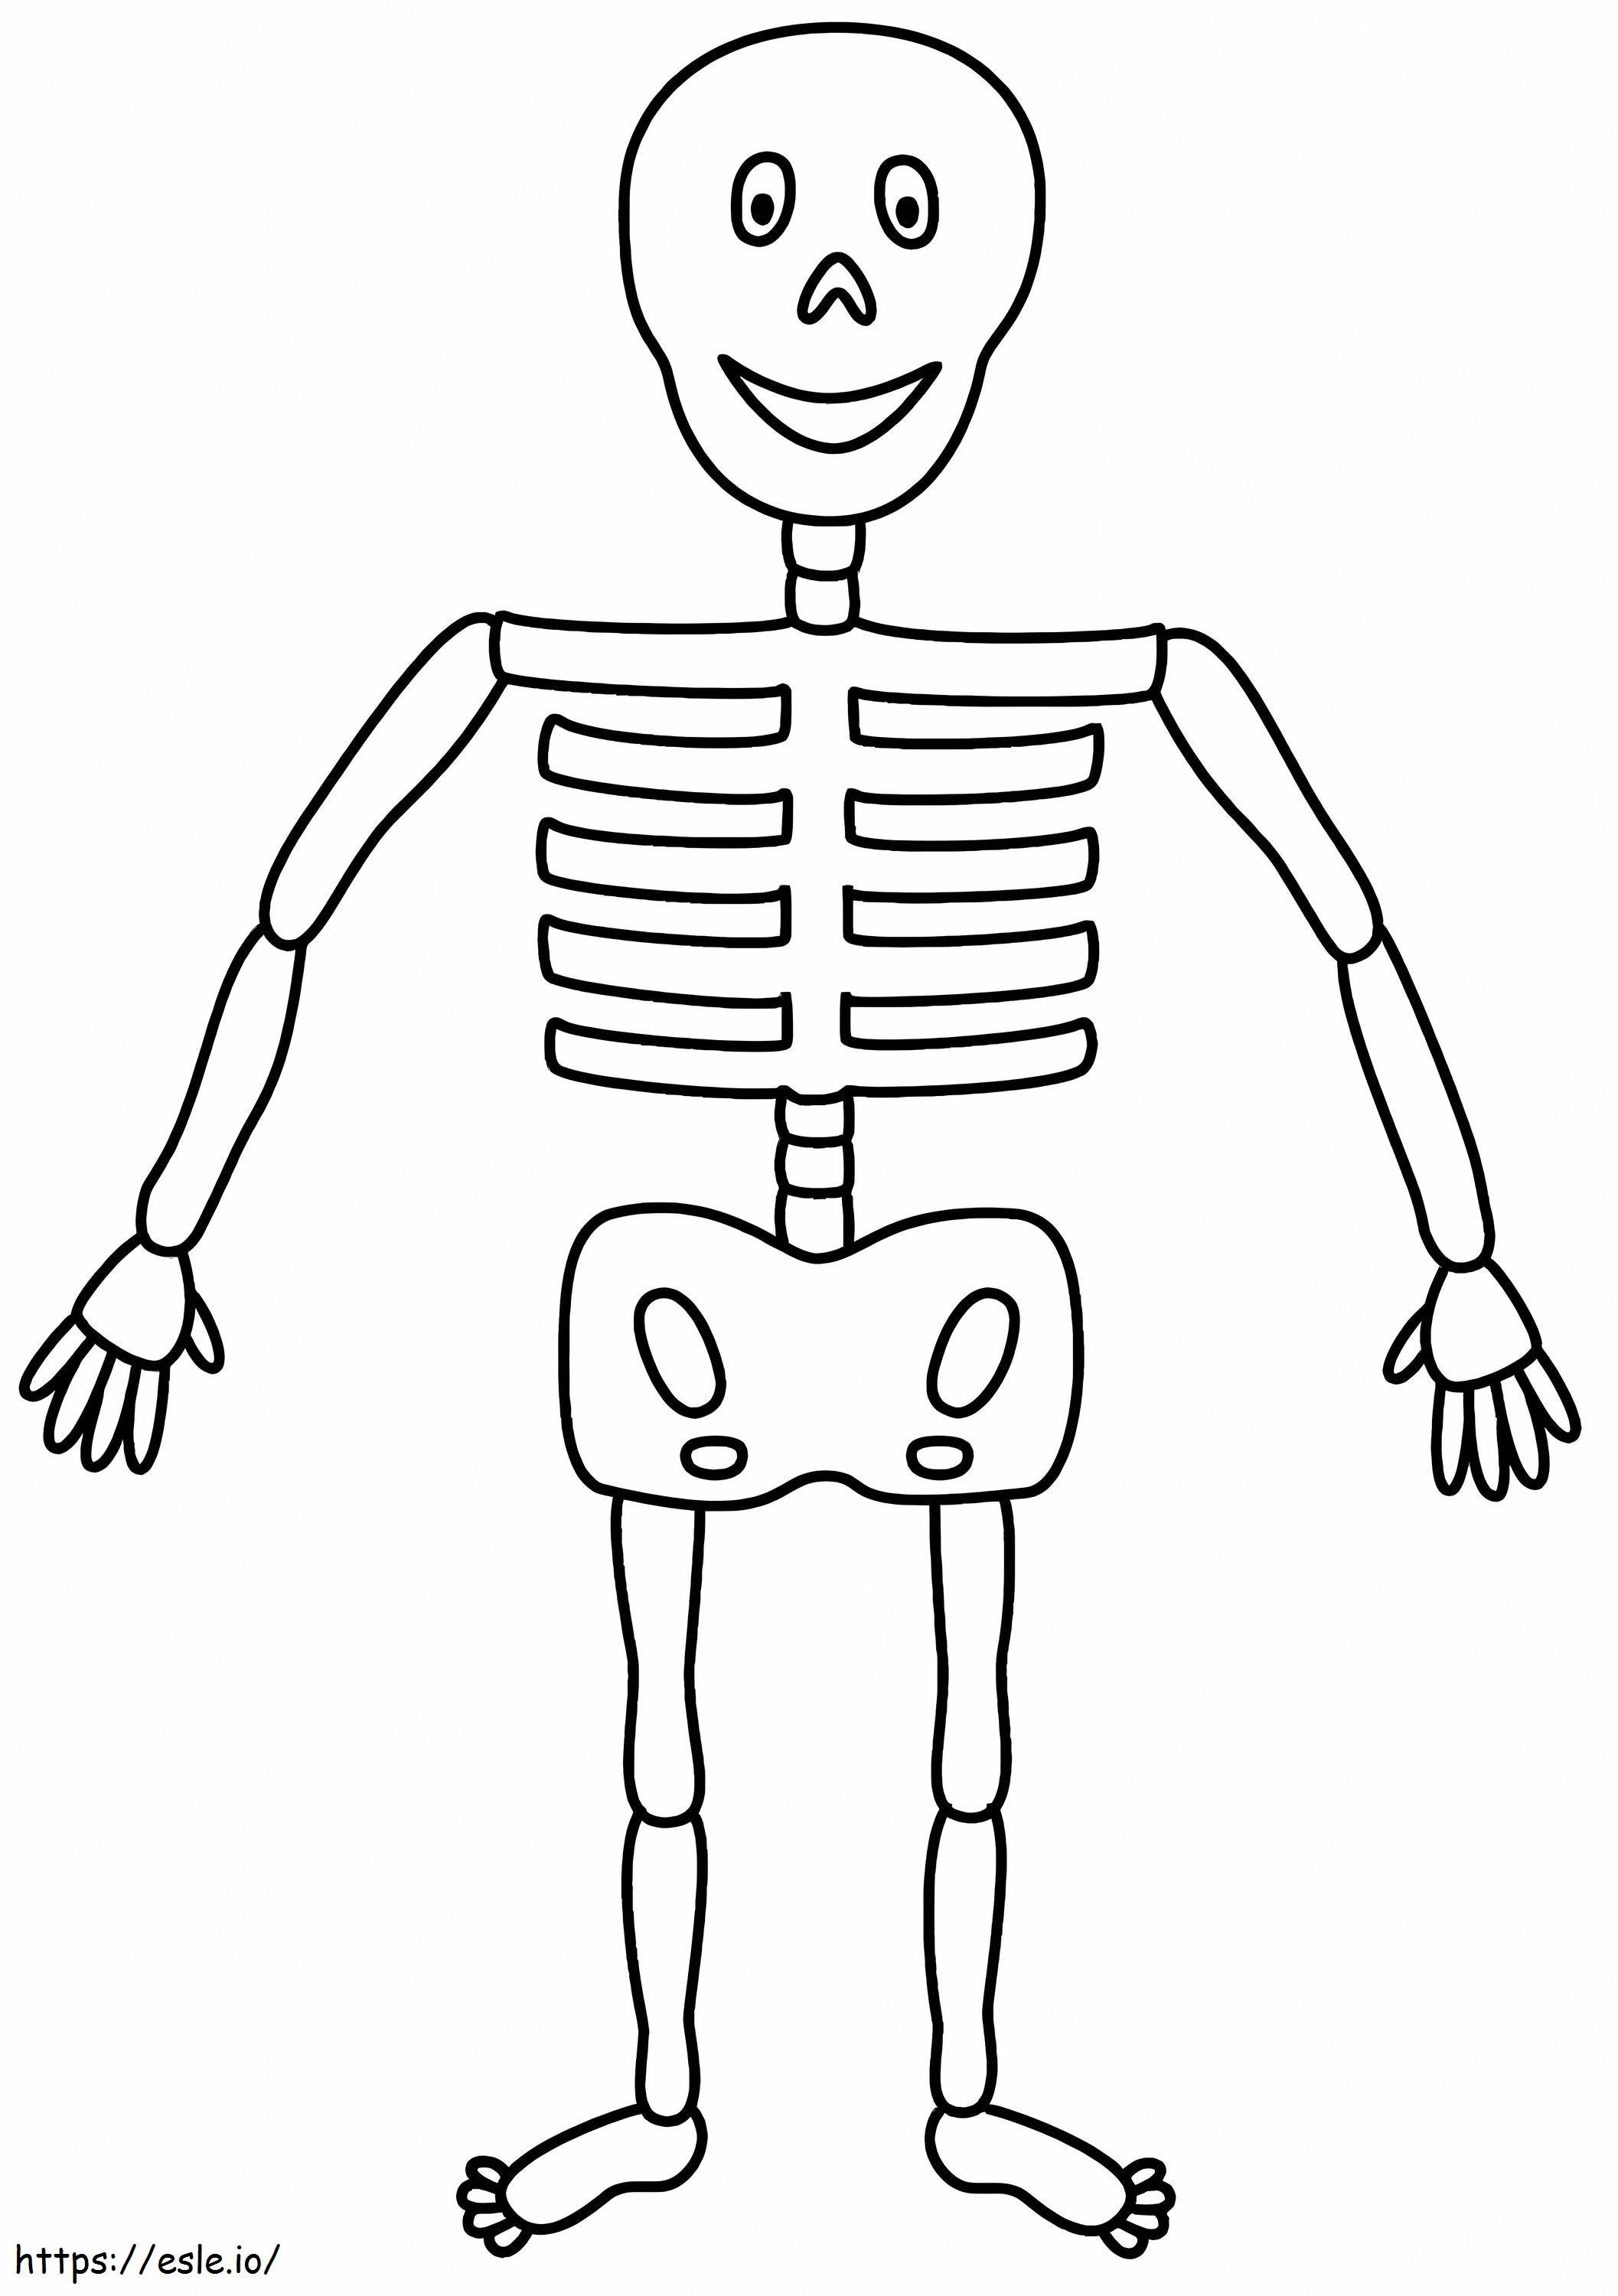 Awesome Skeleton coloring page